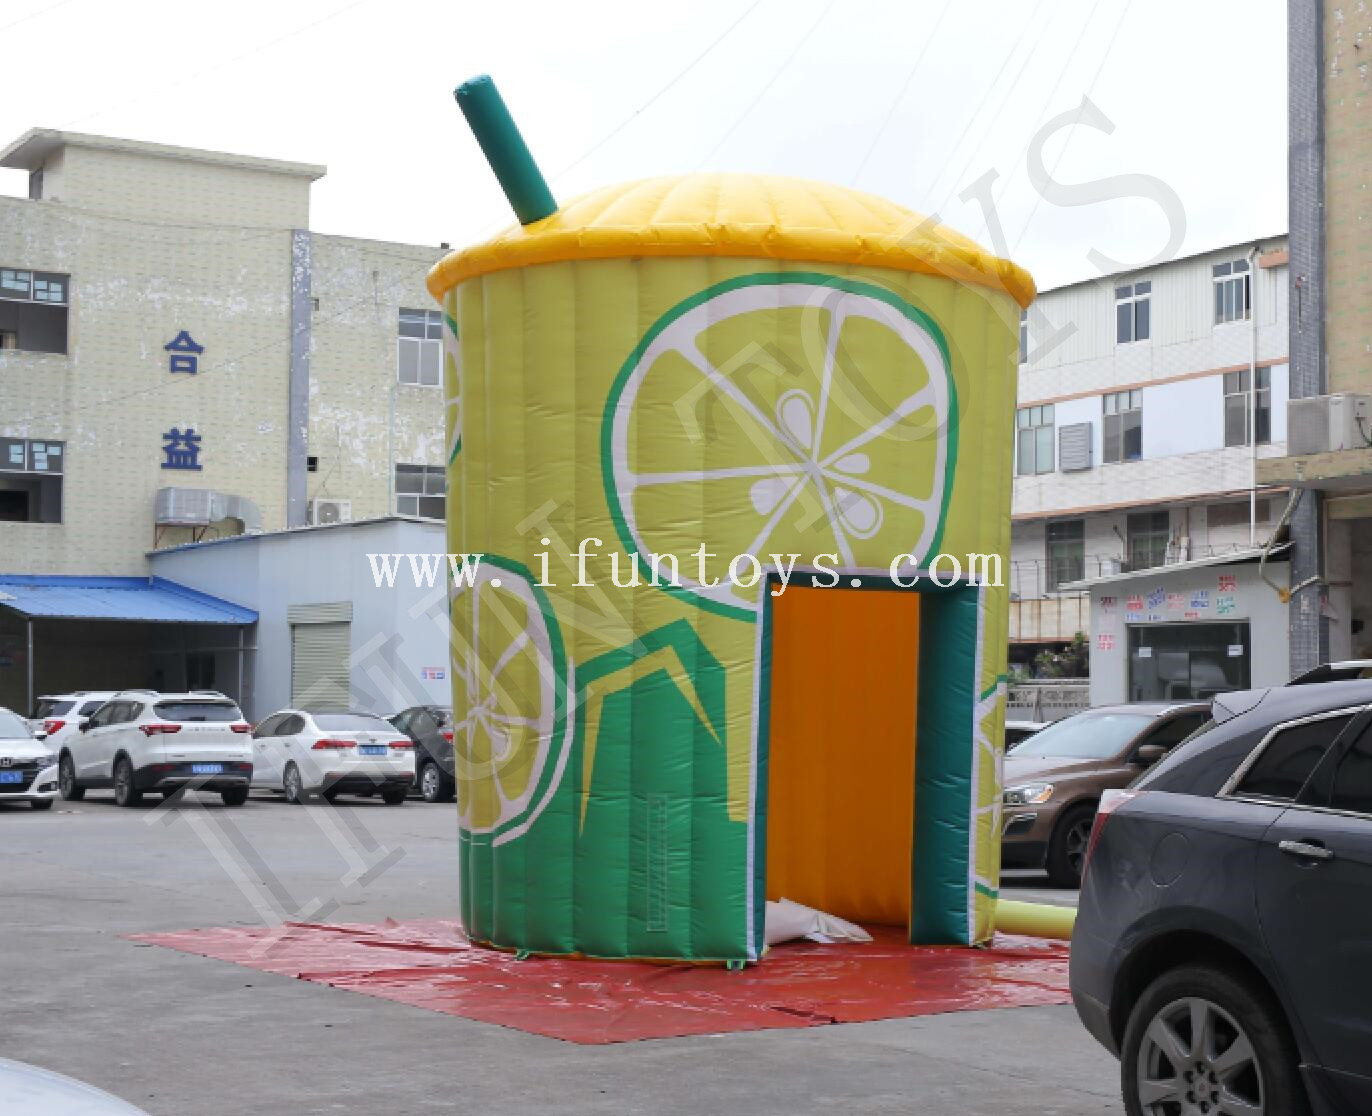 Portable Inflatable Lemonade Booth / Outdoor Concession Stand / Lemonade Bar Tent